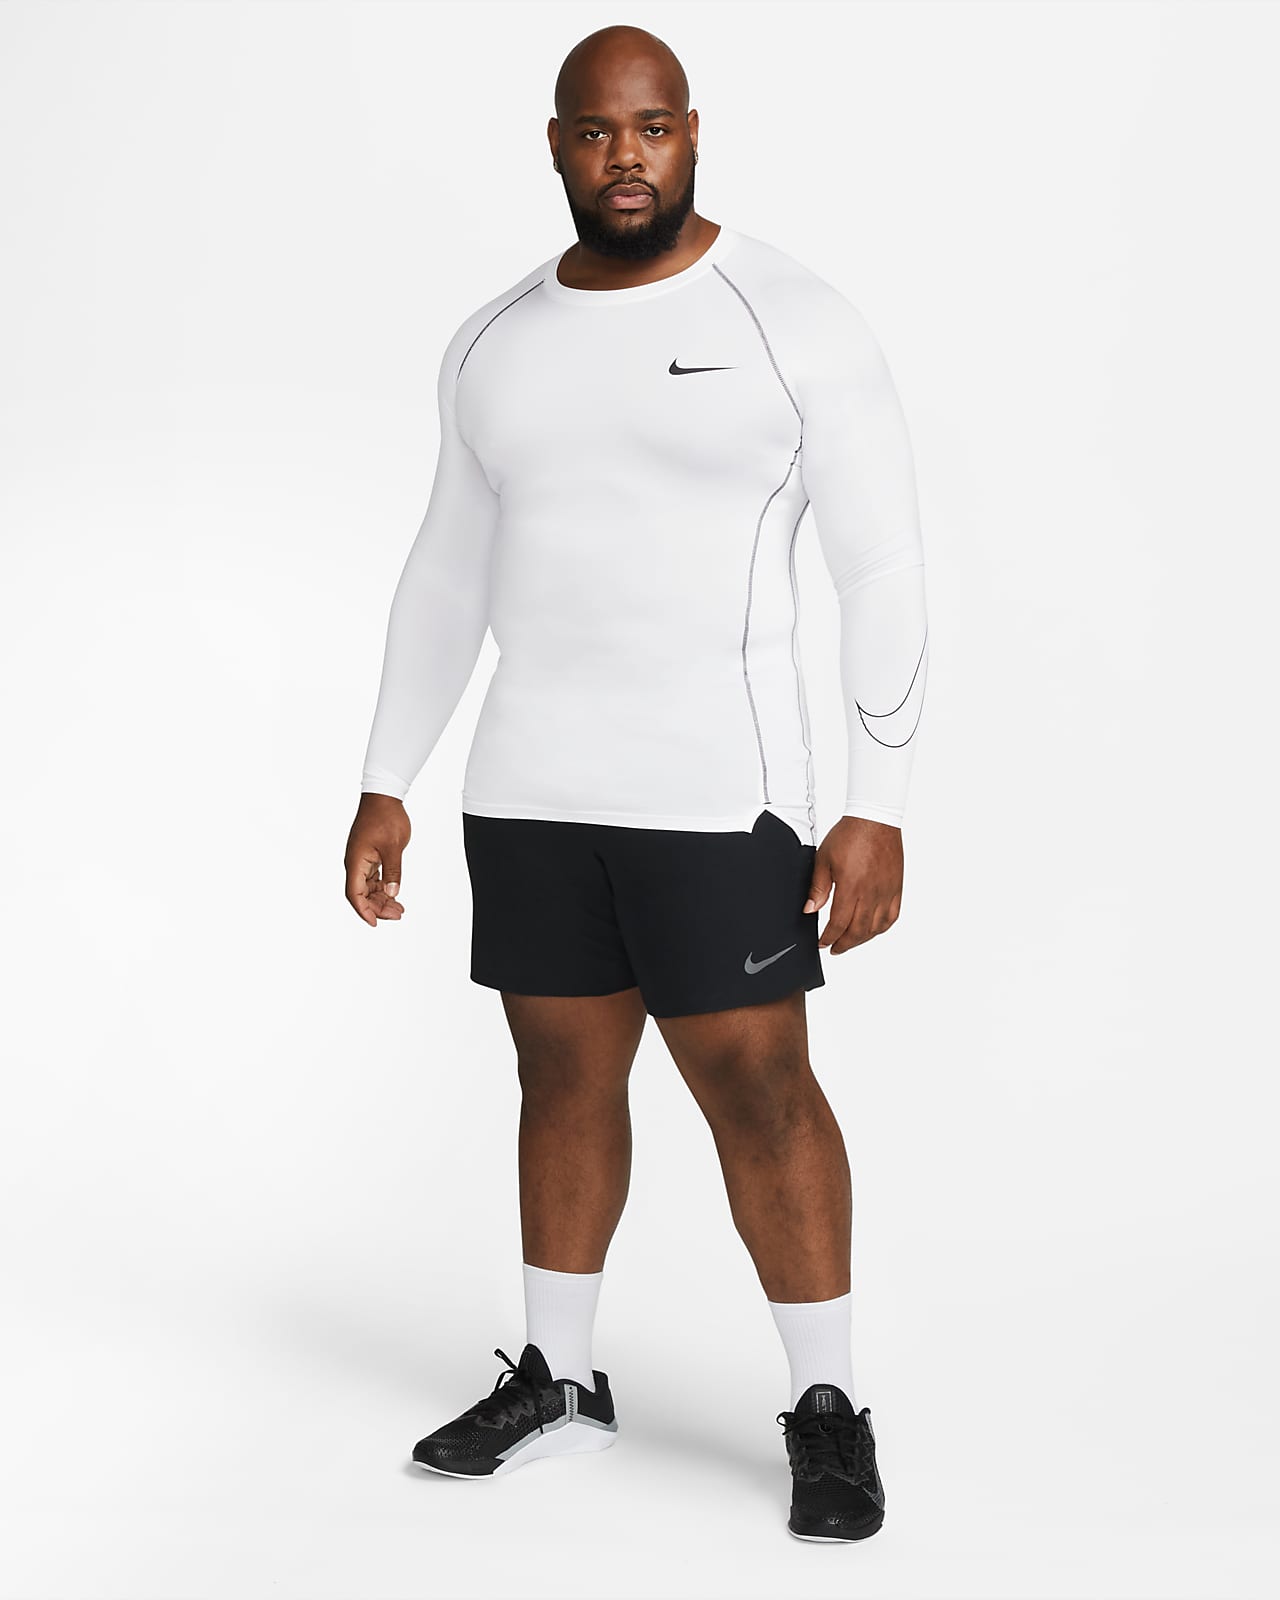 Nike Men's Pro Long Sleeve Compression Top 